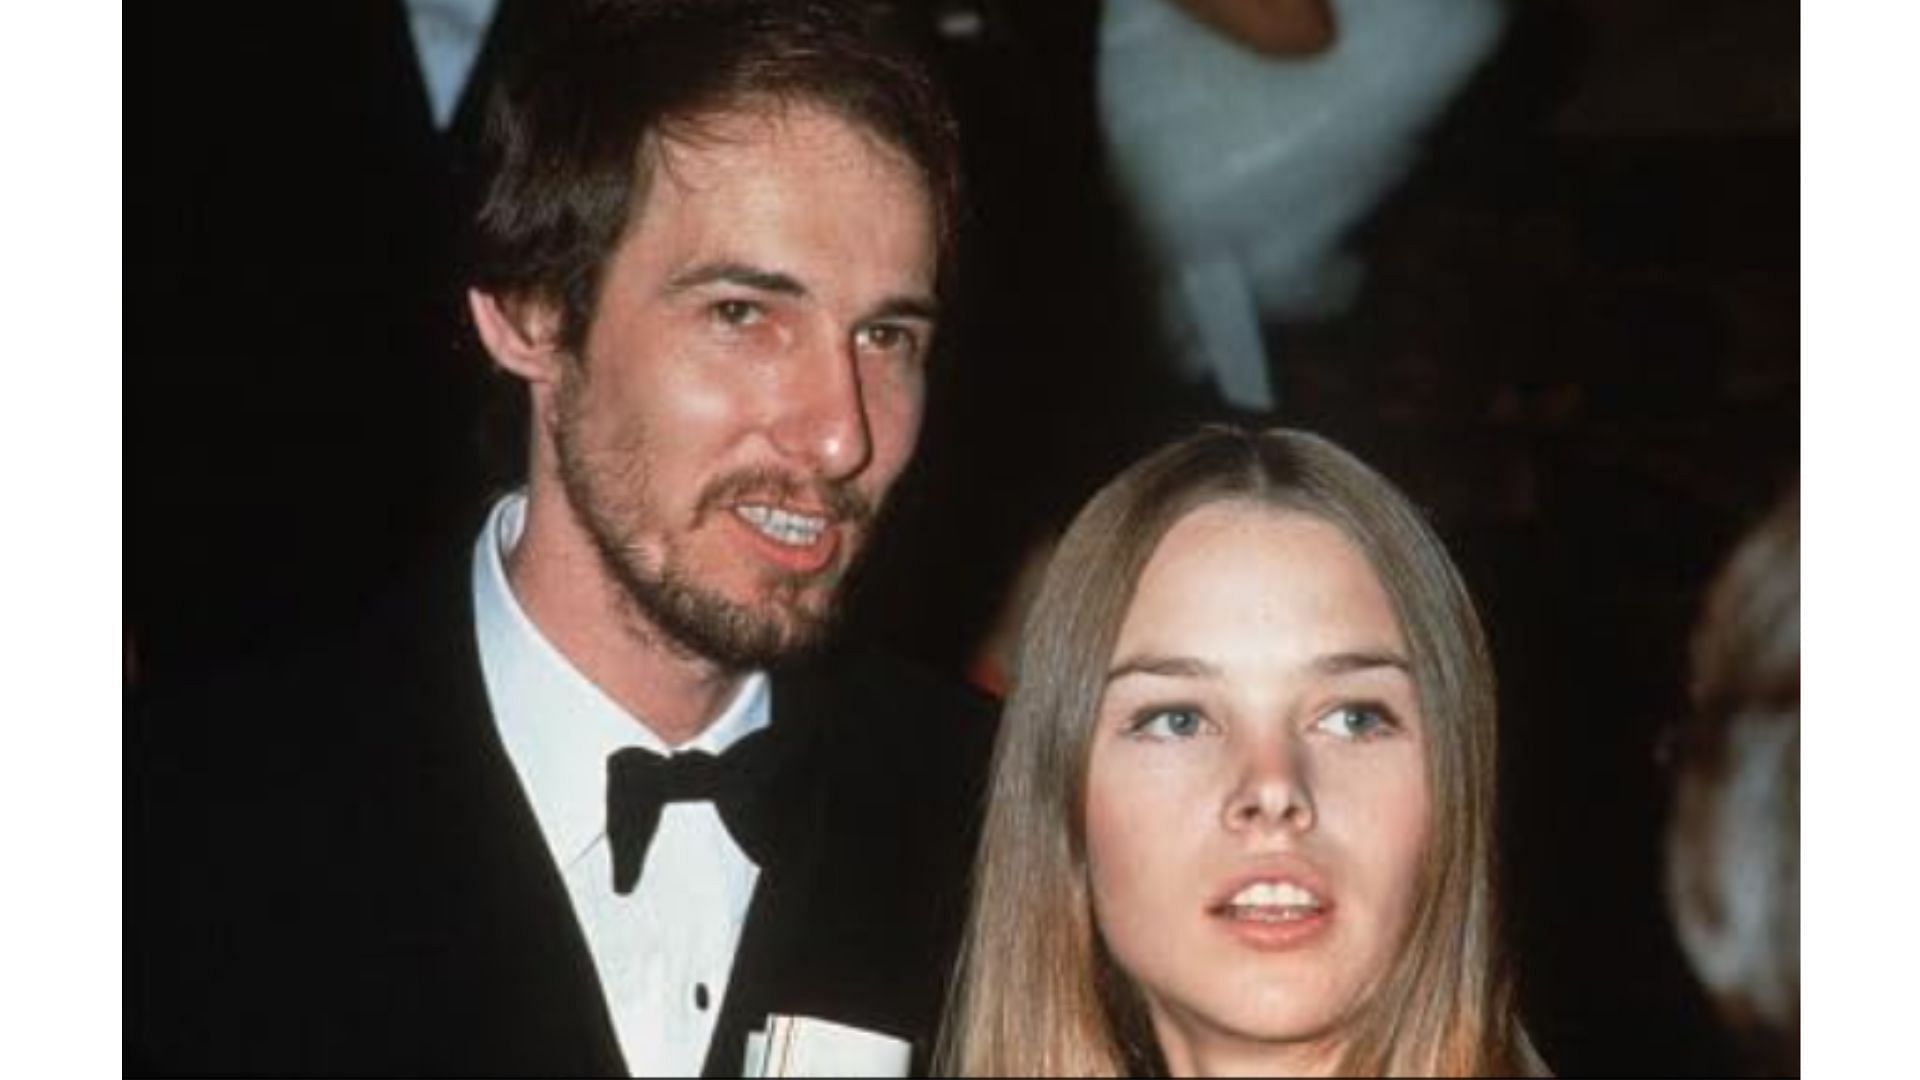 John with his second wife Michelle (Image courtesy mptvimages)